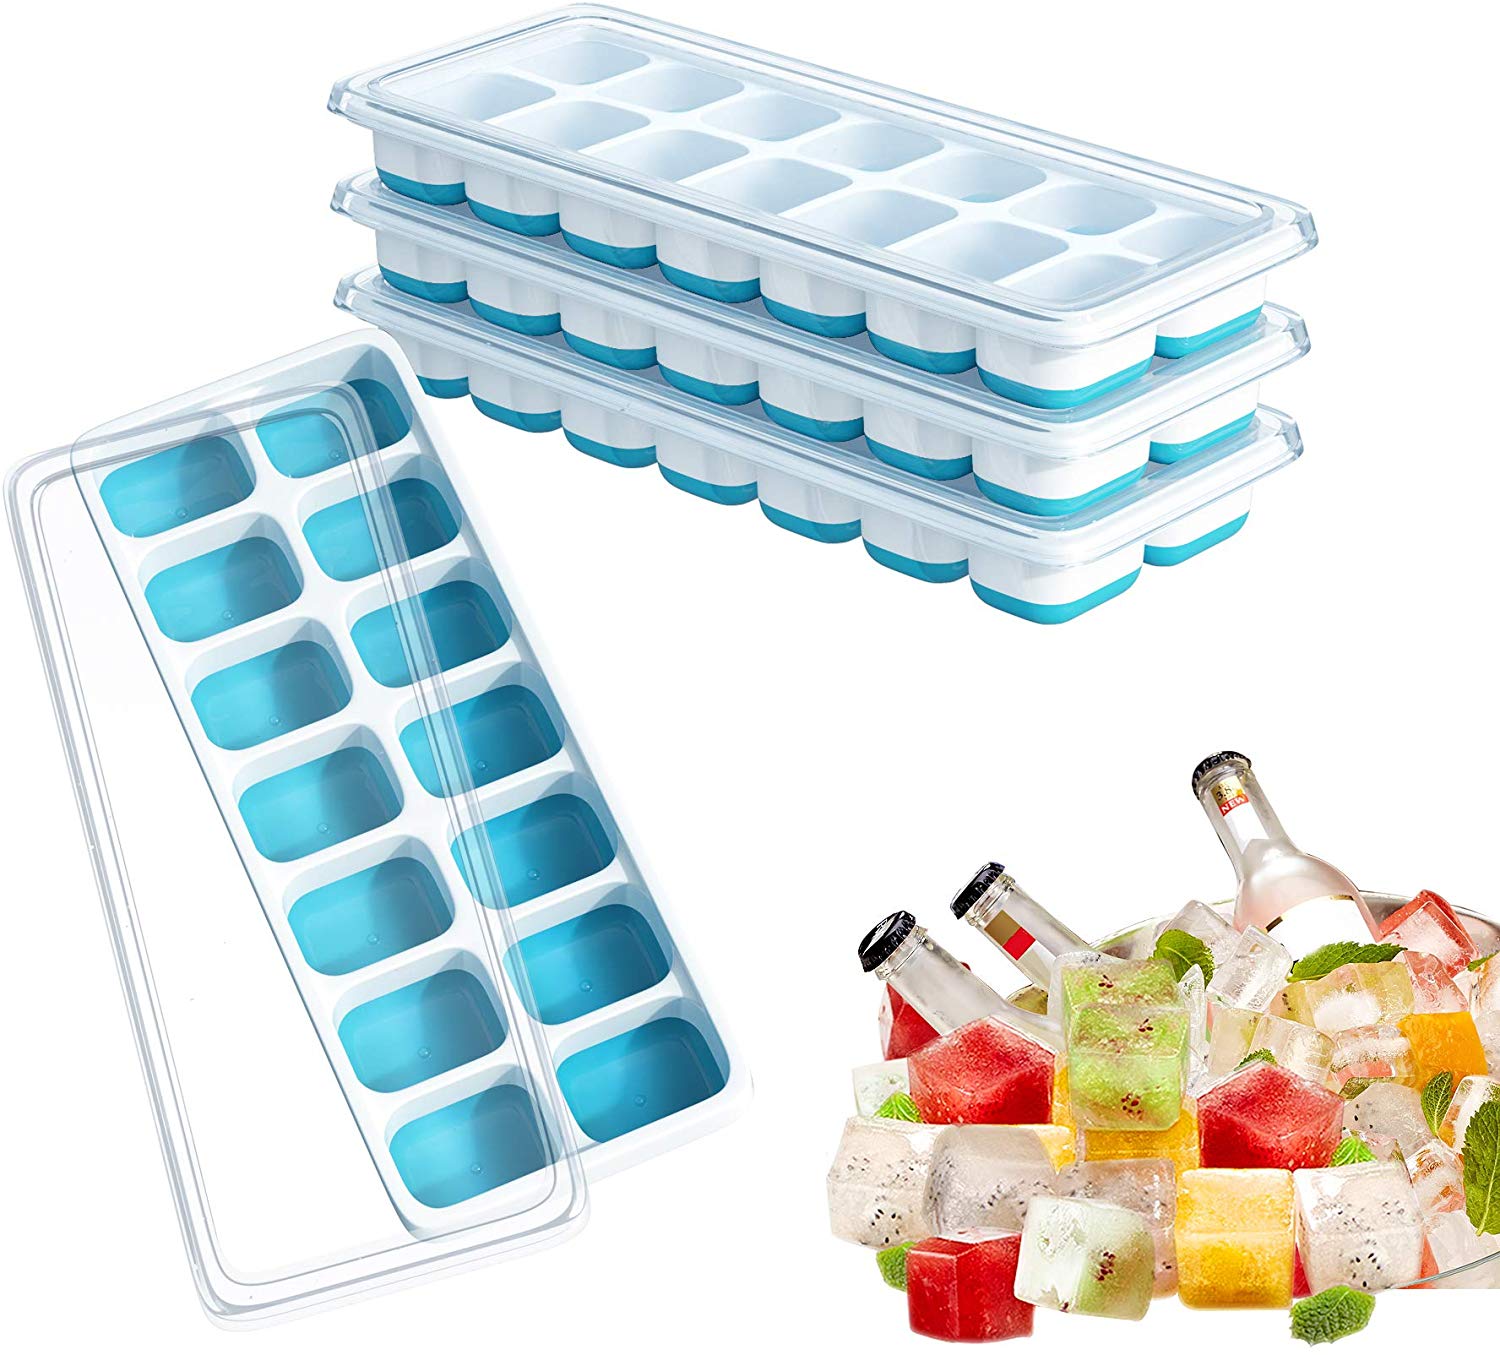 Ice Cube Trays, Ouddy 4 Pack Silicone Ice Cube Trays with Lids $8.99 (REG 	$19.99)